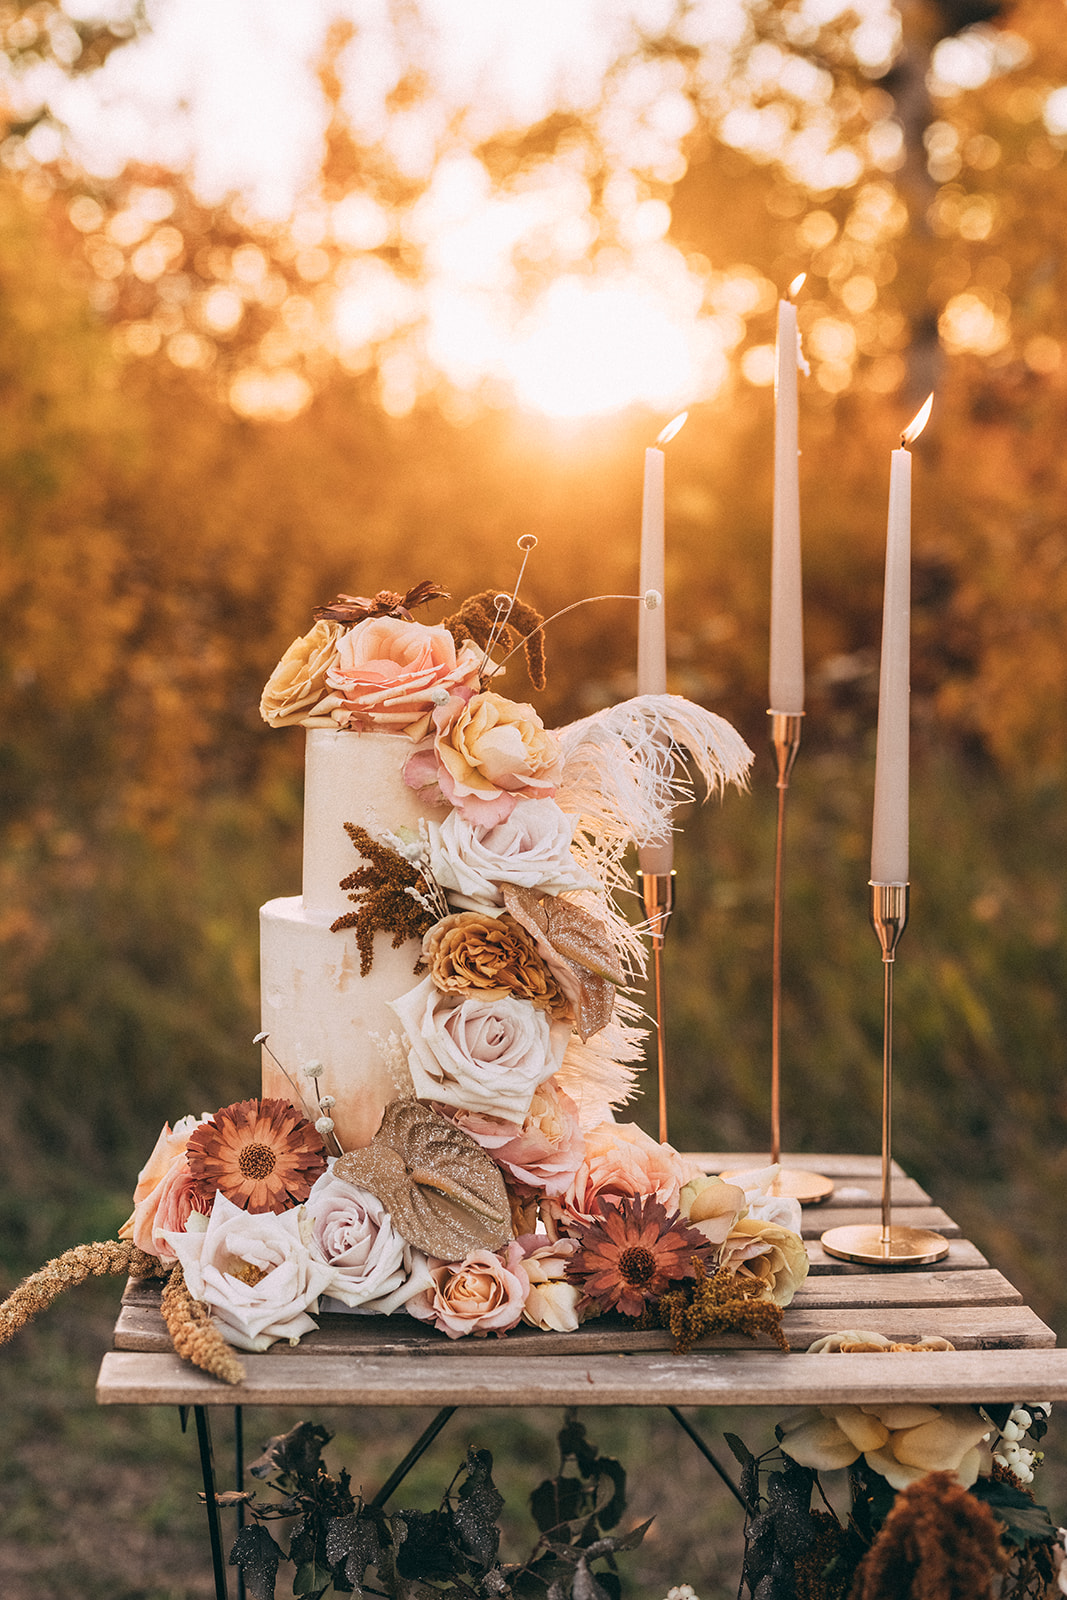 Boho wedding cake at sunset adorned with fall florals